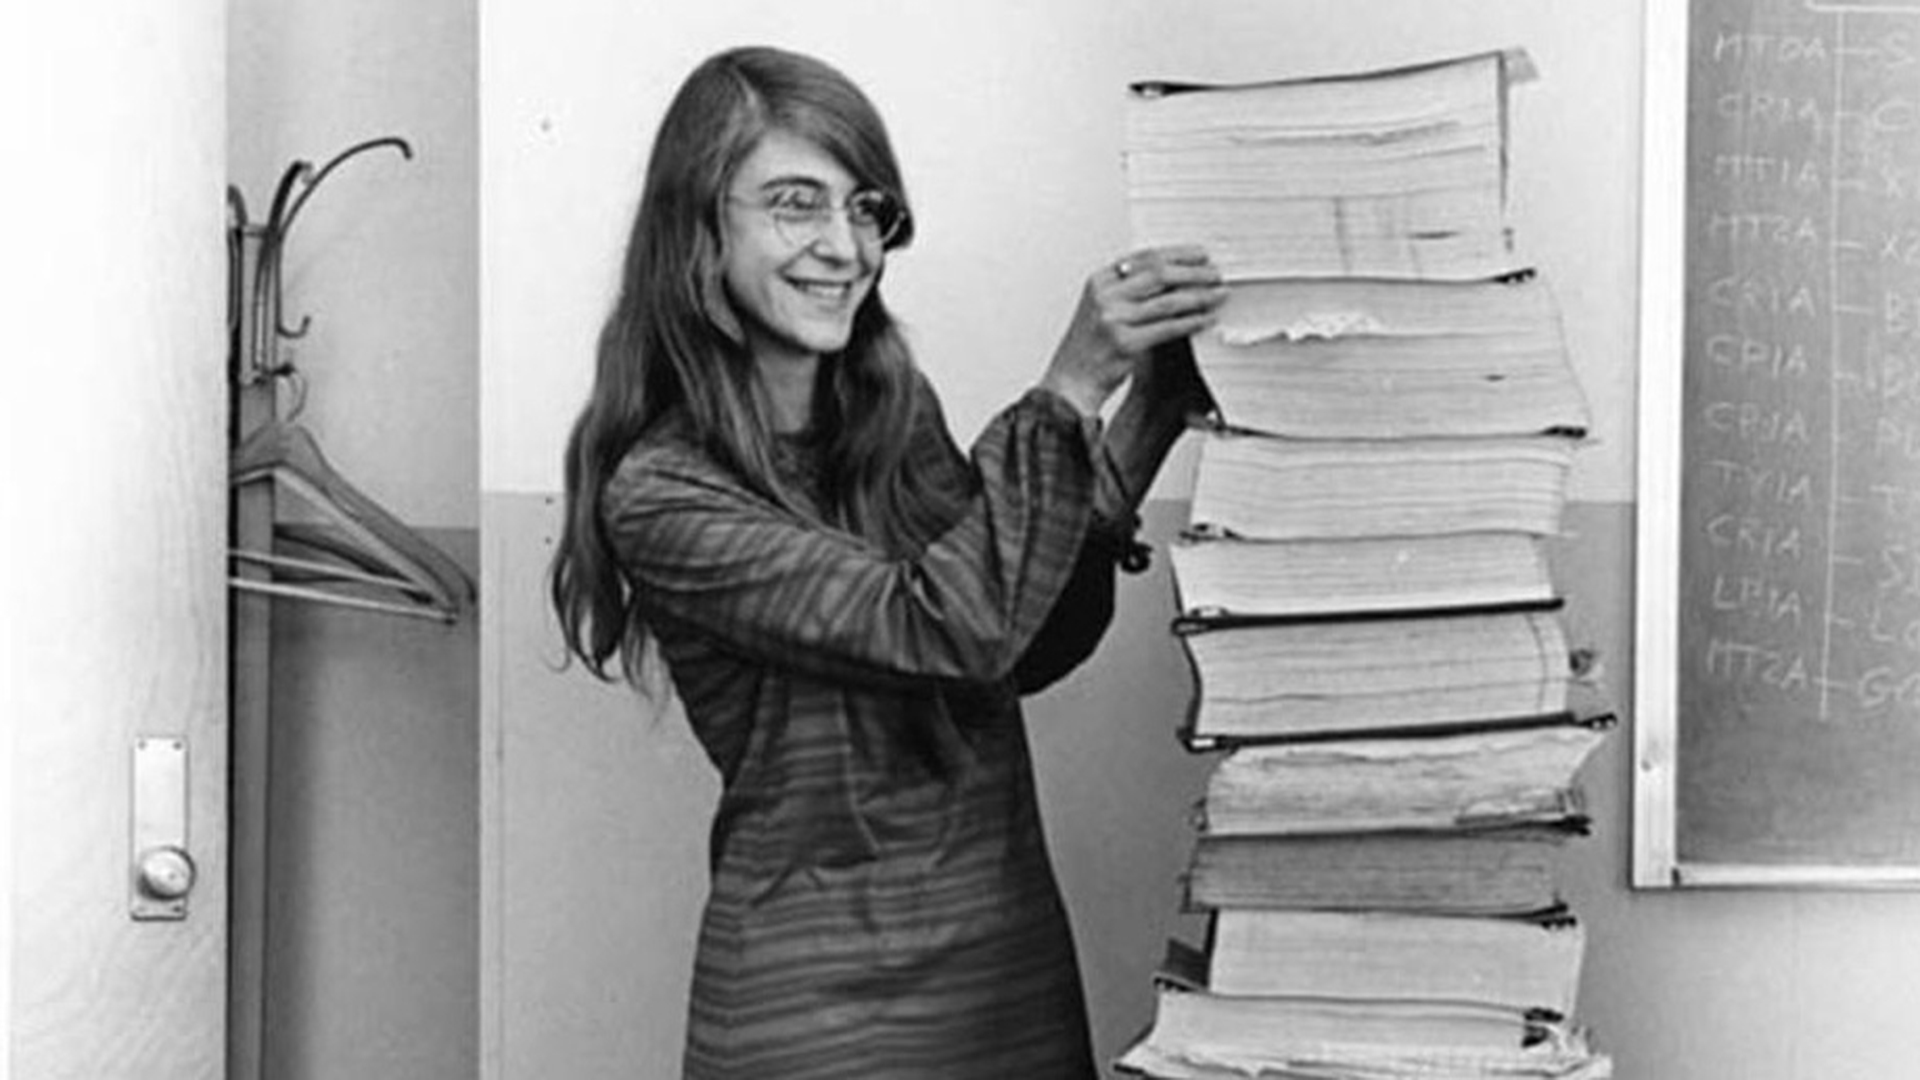 July 20, 1969: Margaret Hamilton’s Computer Code Helped Put the First Man on the Moon